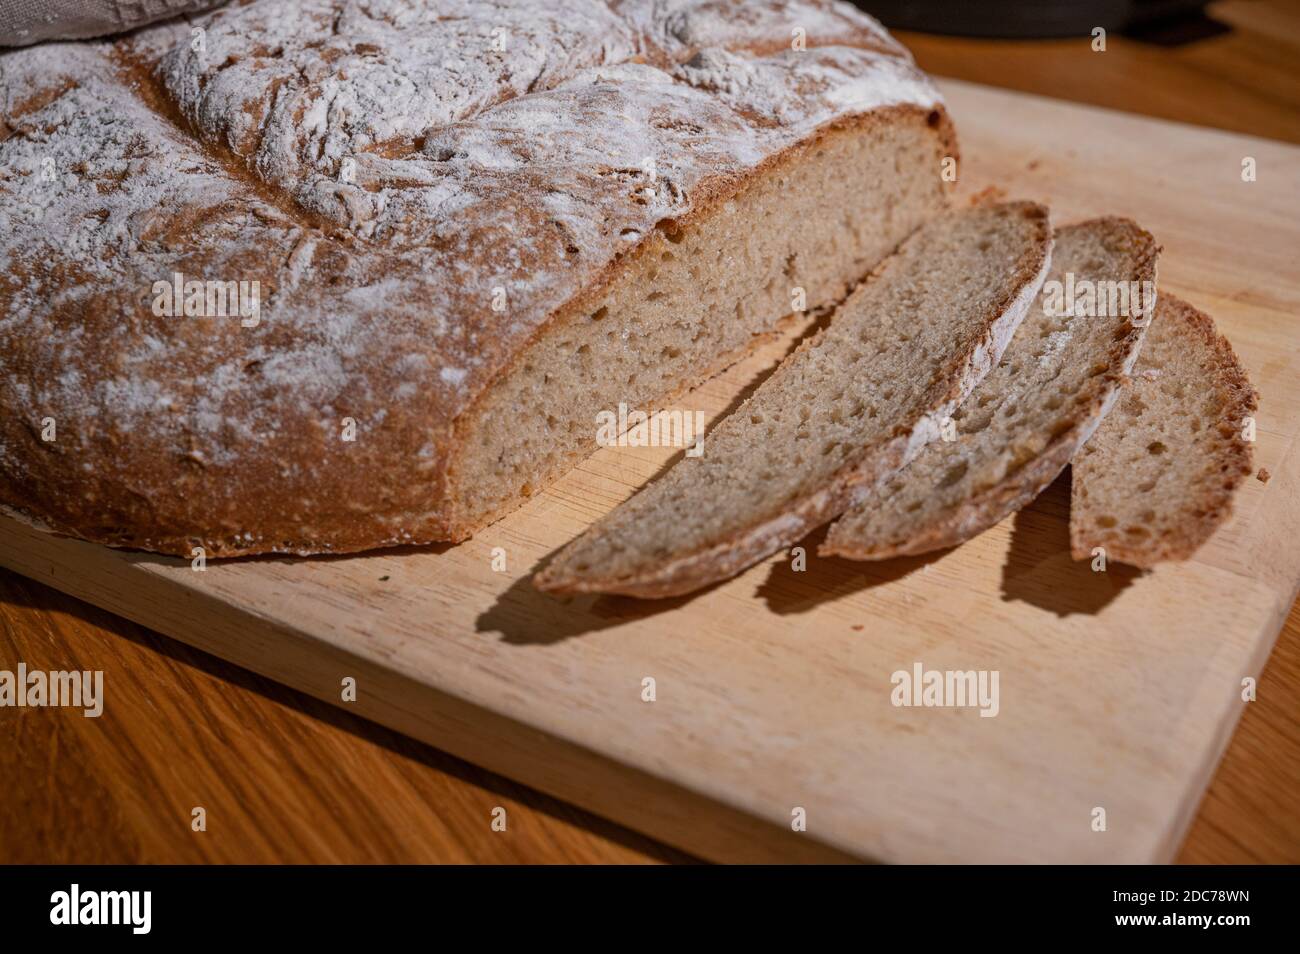 fresh farmhouse bread lies wrapped in a cloth on a wooden board and was cut into slices Stock Photo